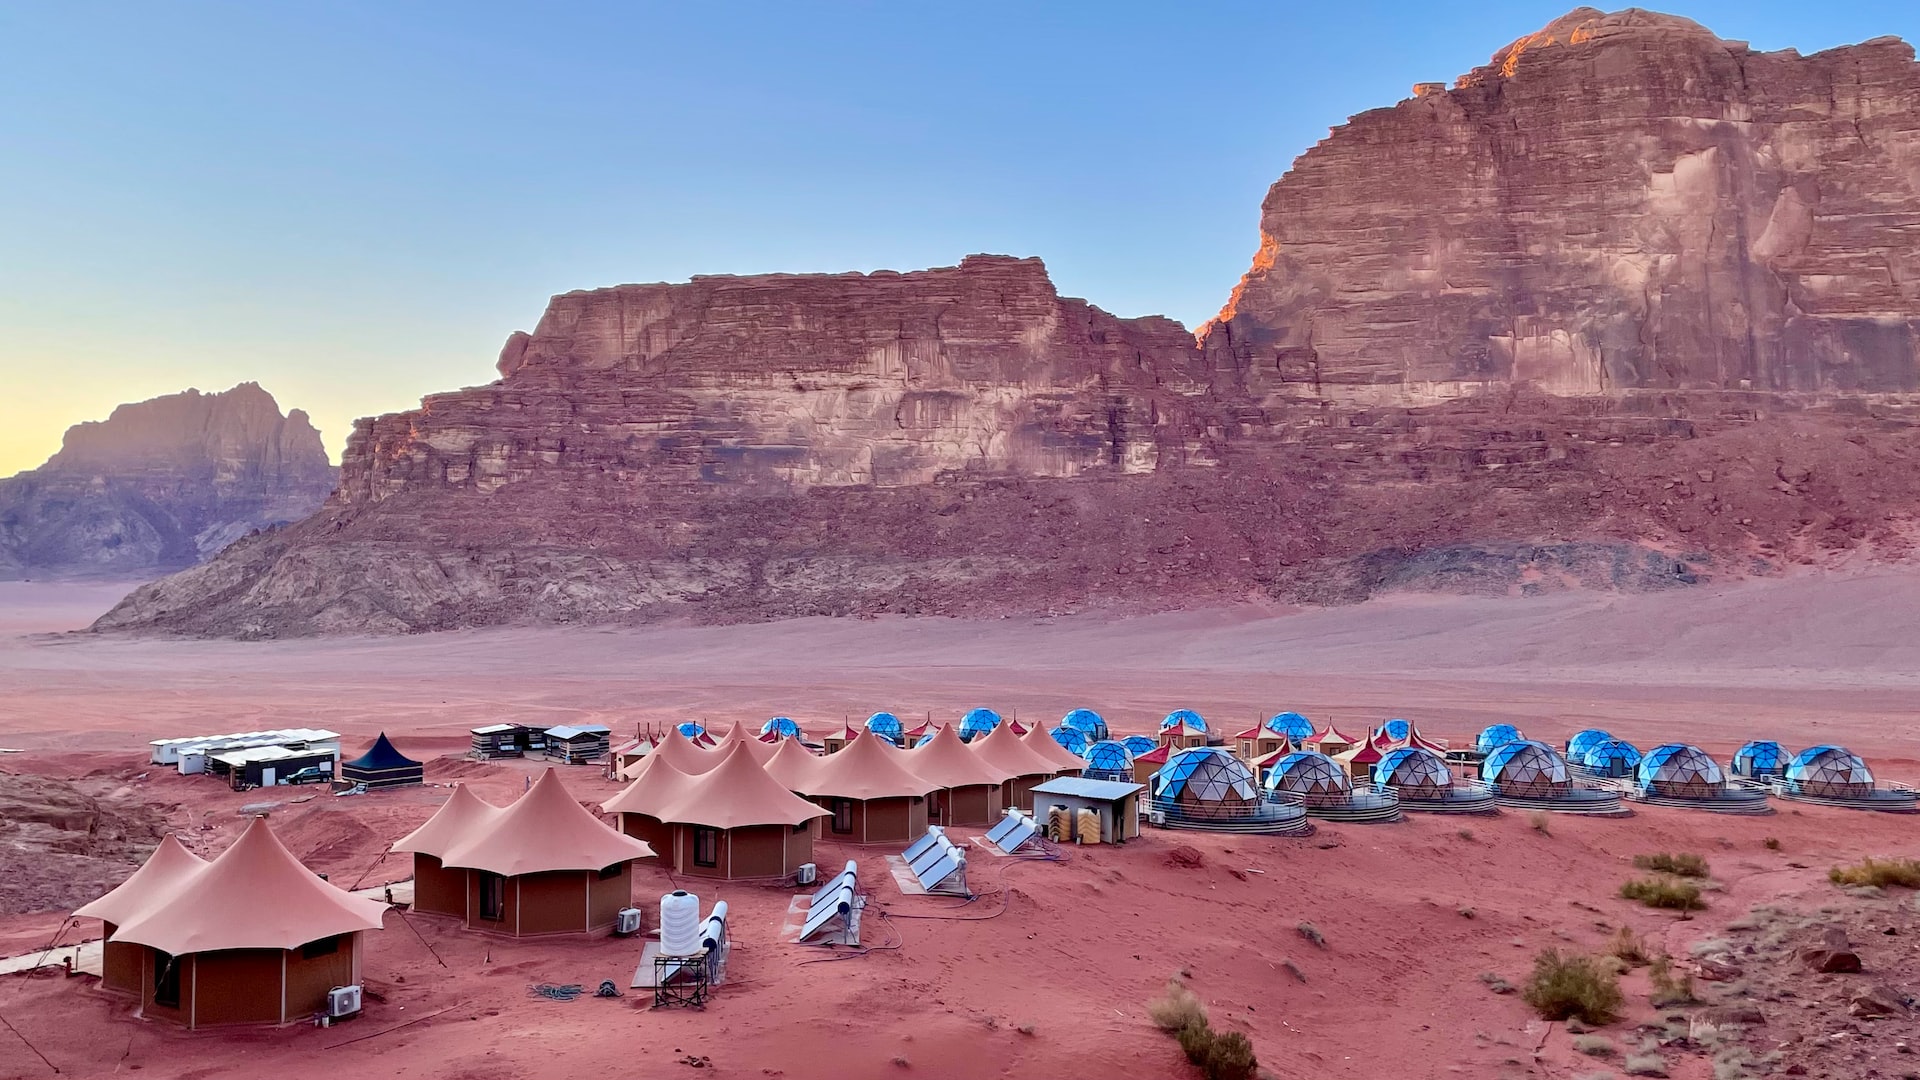 Reasons you should visit Wadi Rum from Israel- Wadi Rum camps. yes, this is Earth